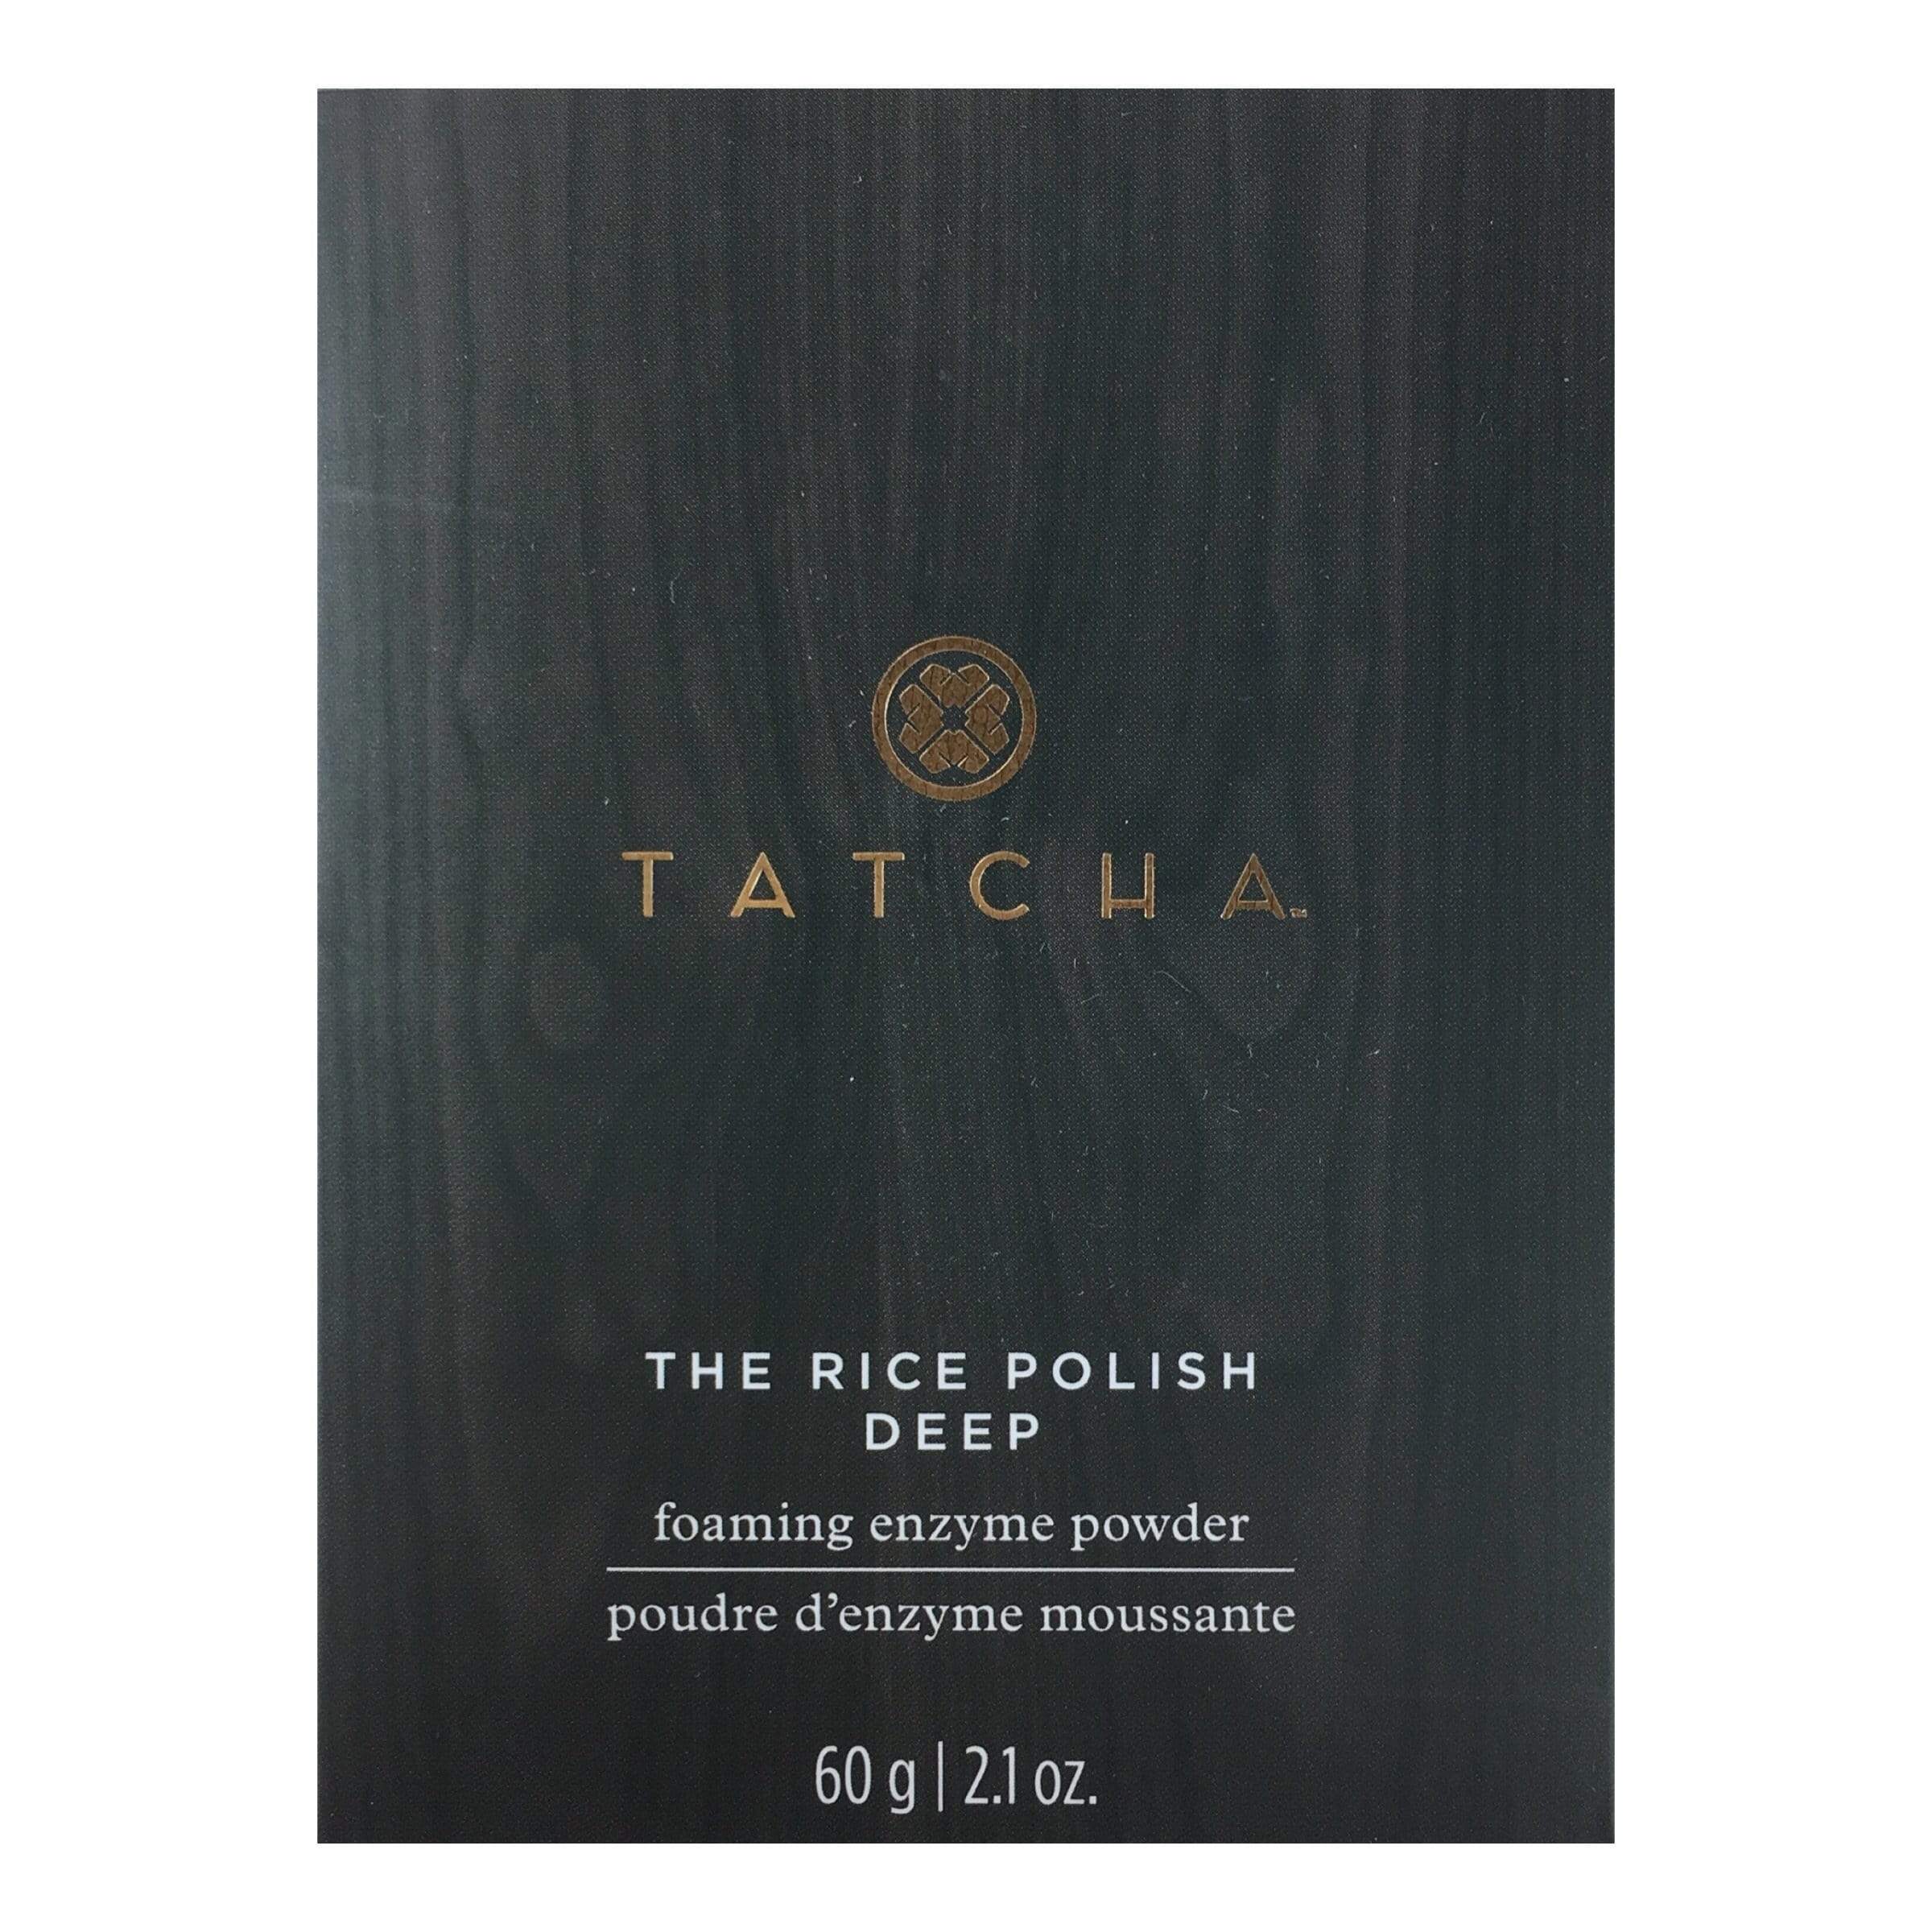 TATCHA The Rice Polish Deep Foaming Enzyme Powder - Normal To Oily, 60g | 2.1oz, Skin Care, London Loves Beauty